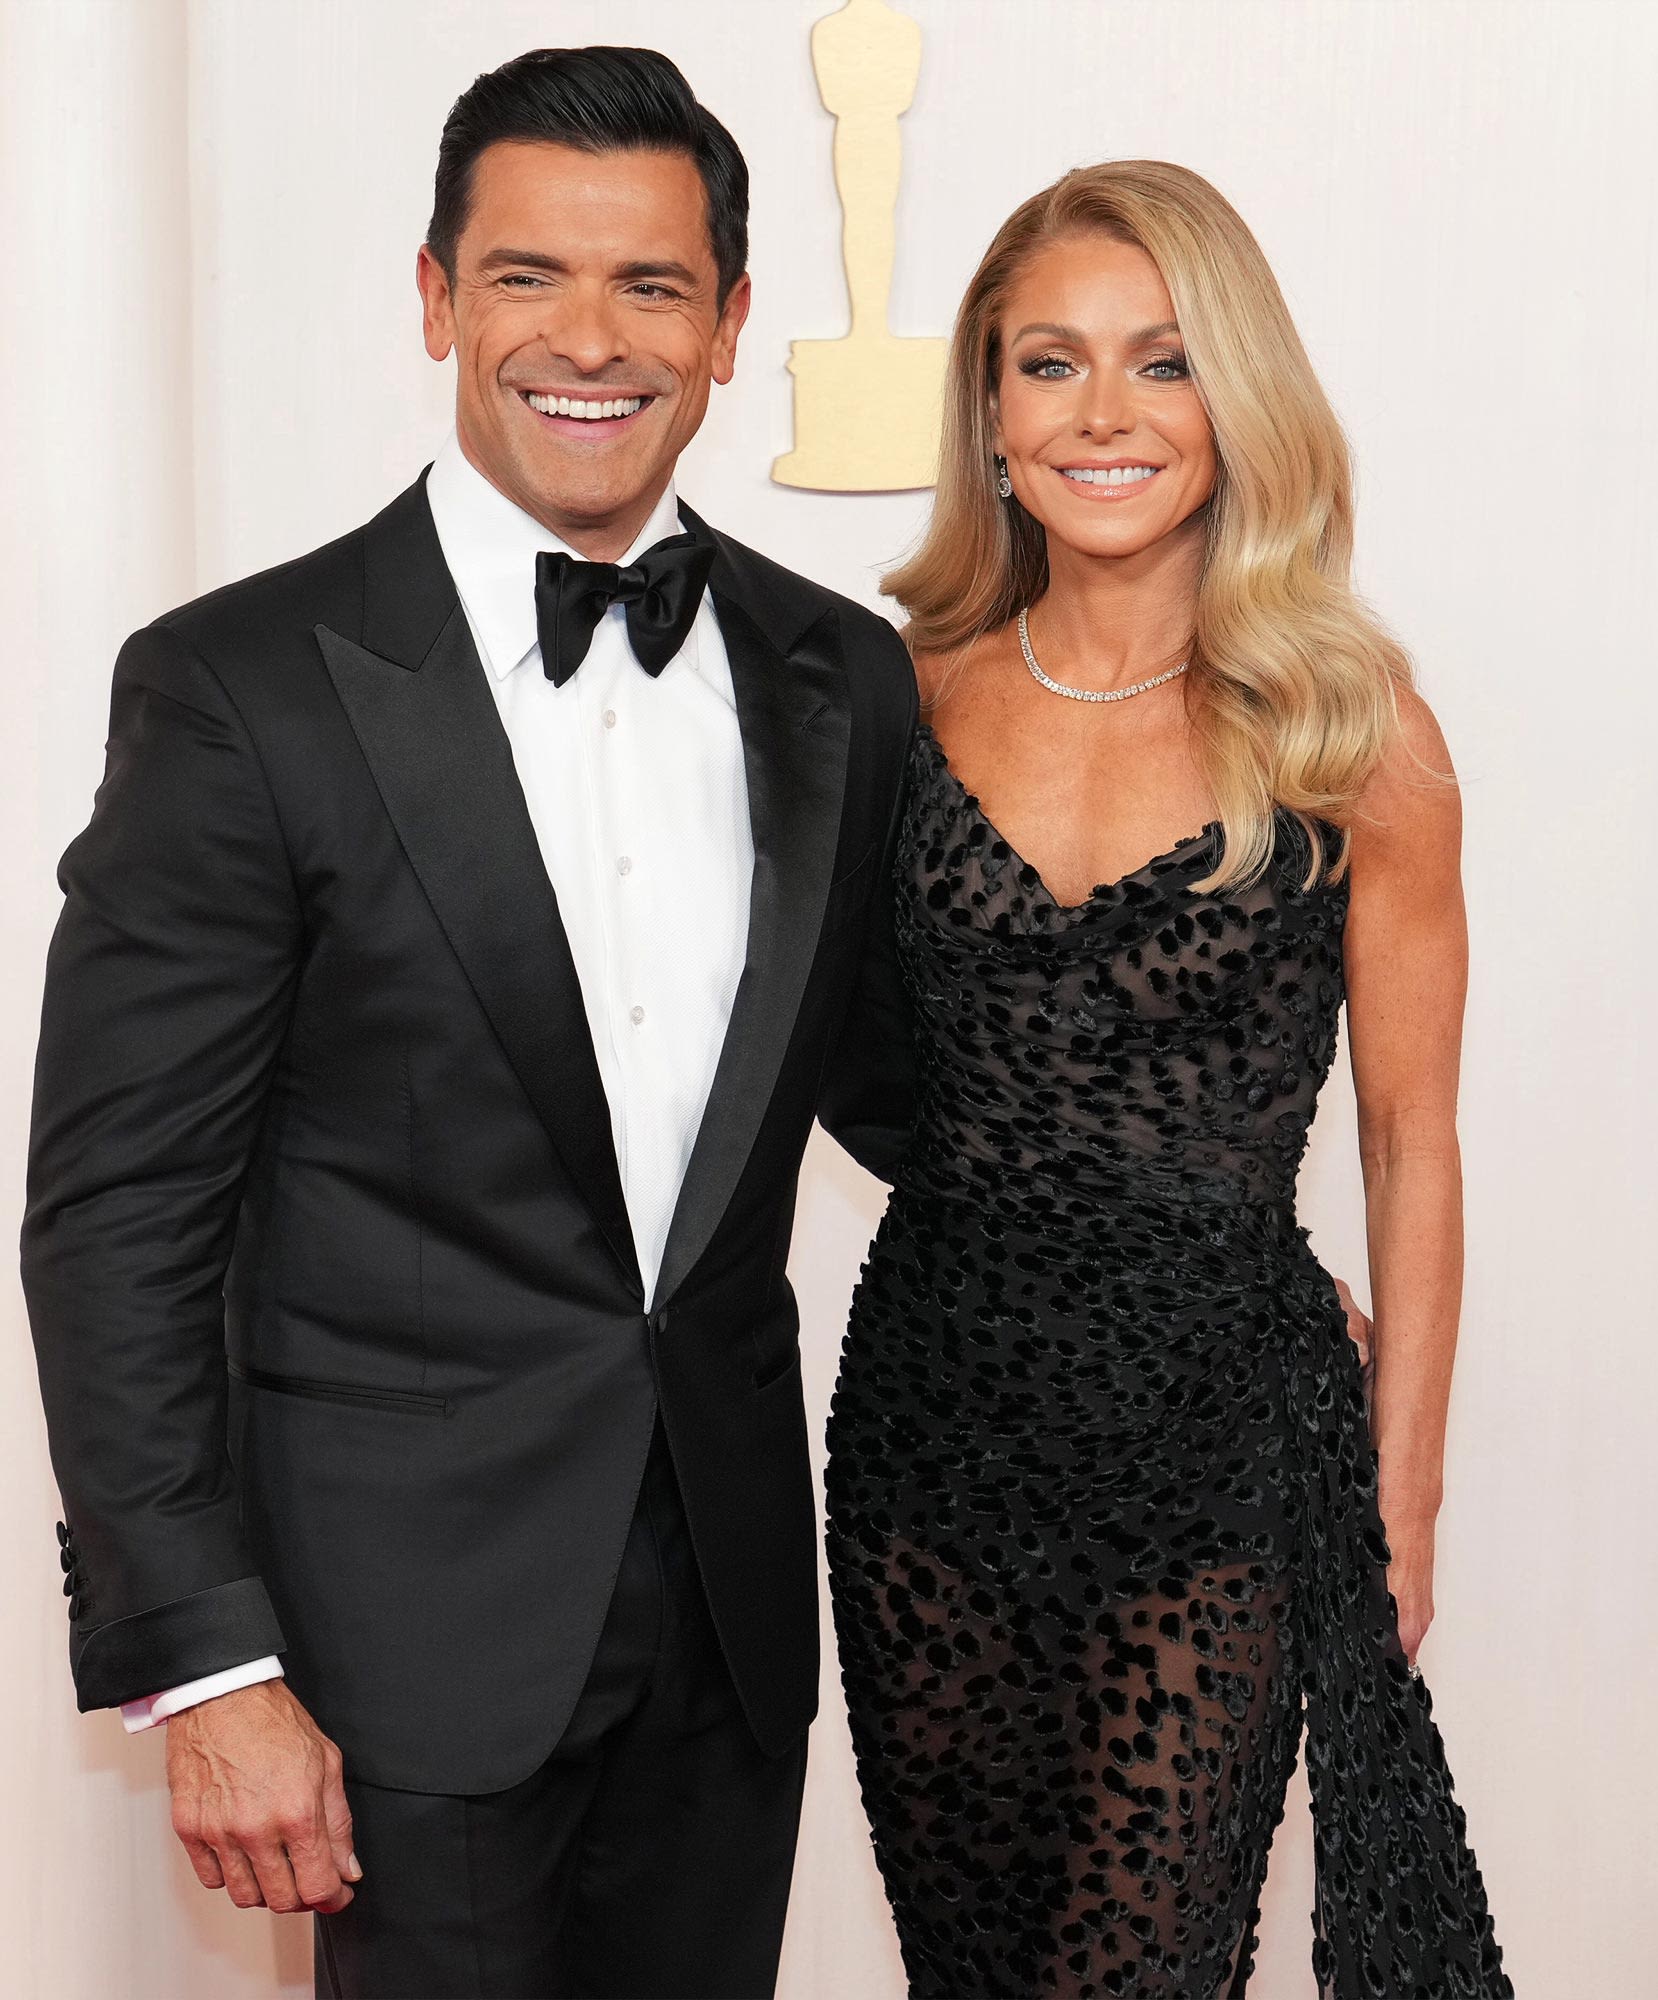 Kelly Ripa and Mark Consuelos Celebrate Their Love on 28th Anniversary